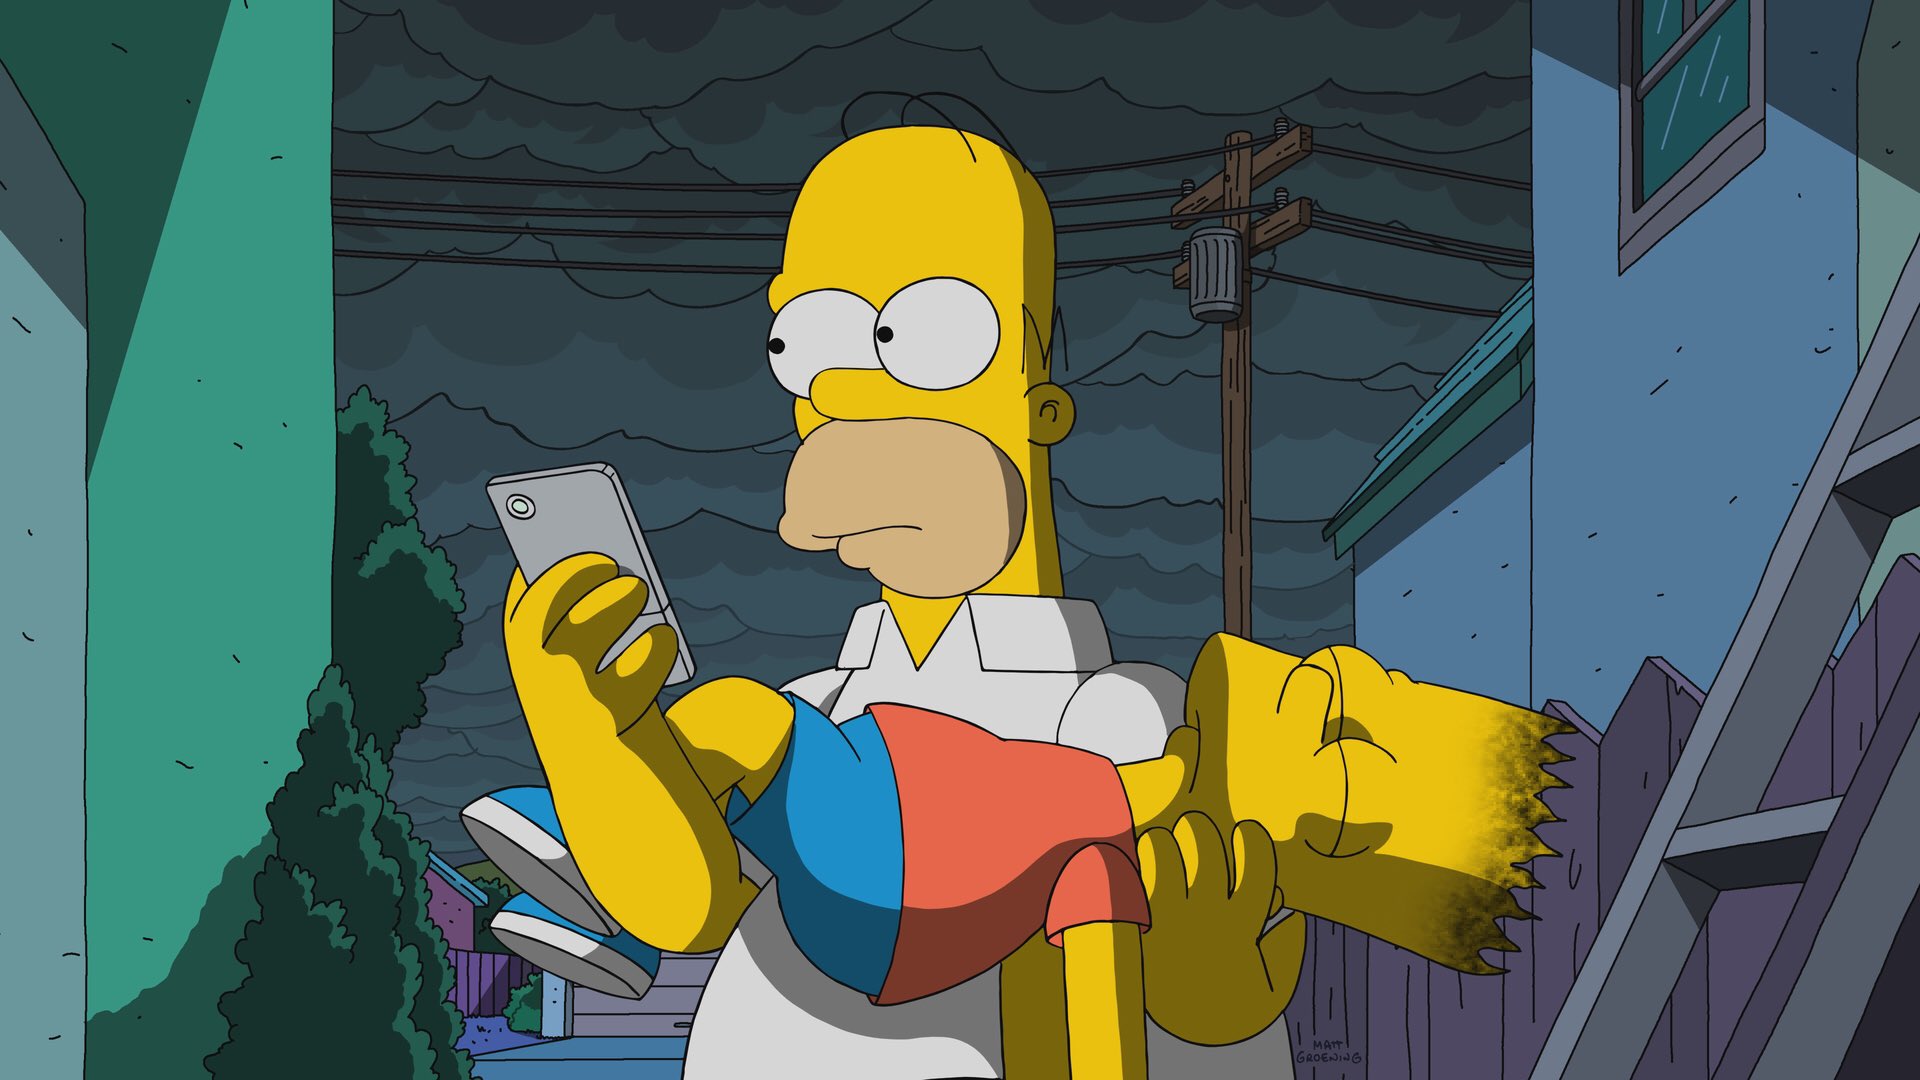 The Simpsons - Why is Bart sad? Find out tomorrow at 8/7c!